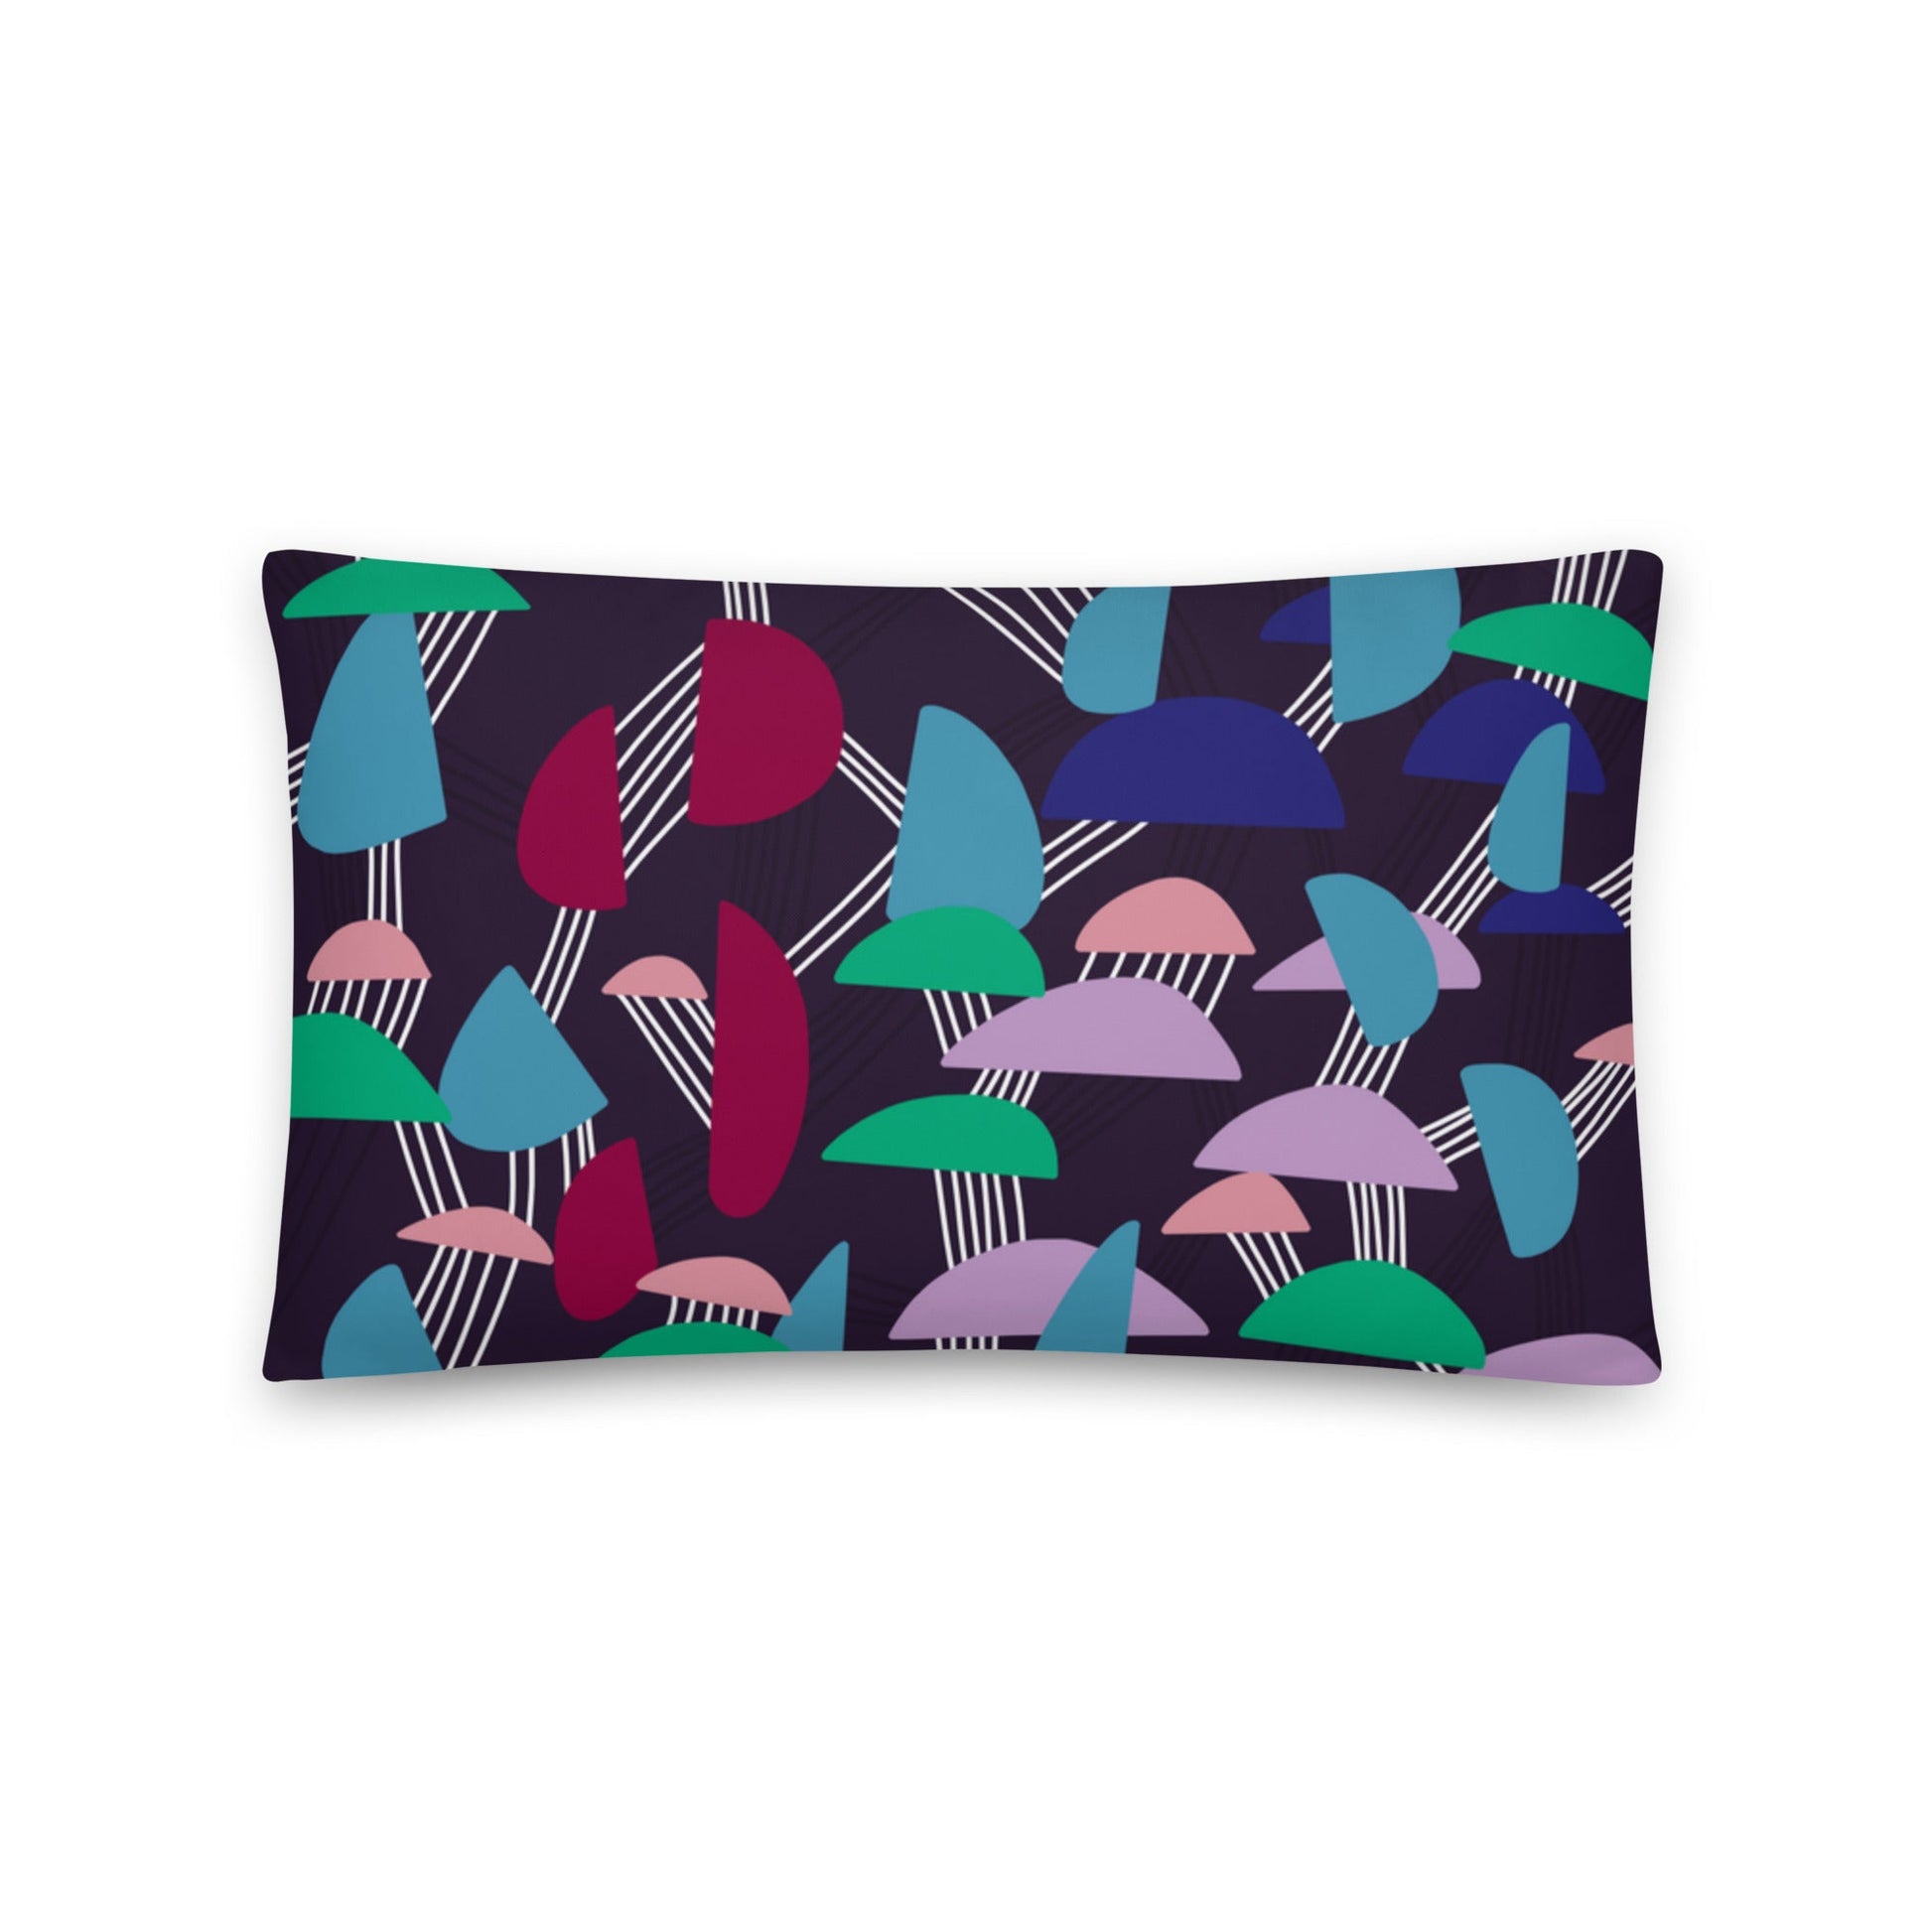 Shrooms Premium Cushion Cover Cushion Cover Great Functional Goods 